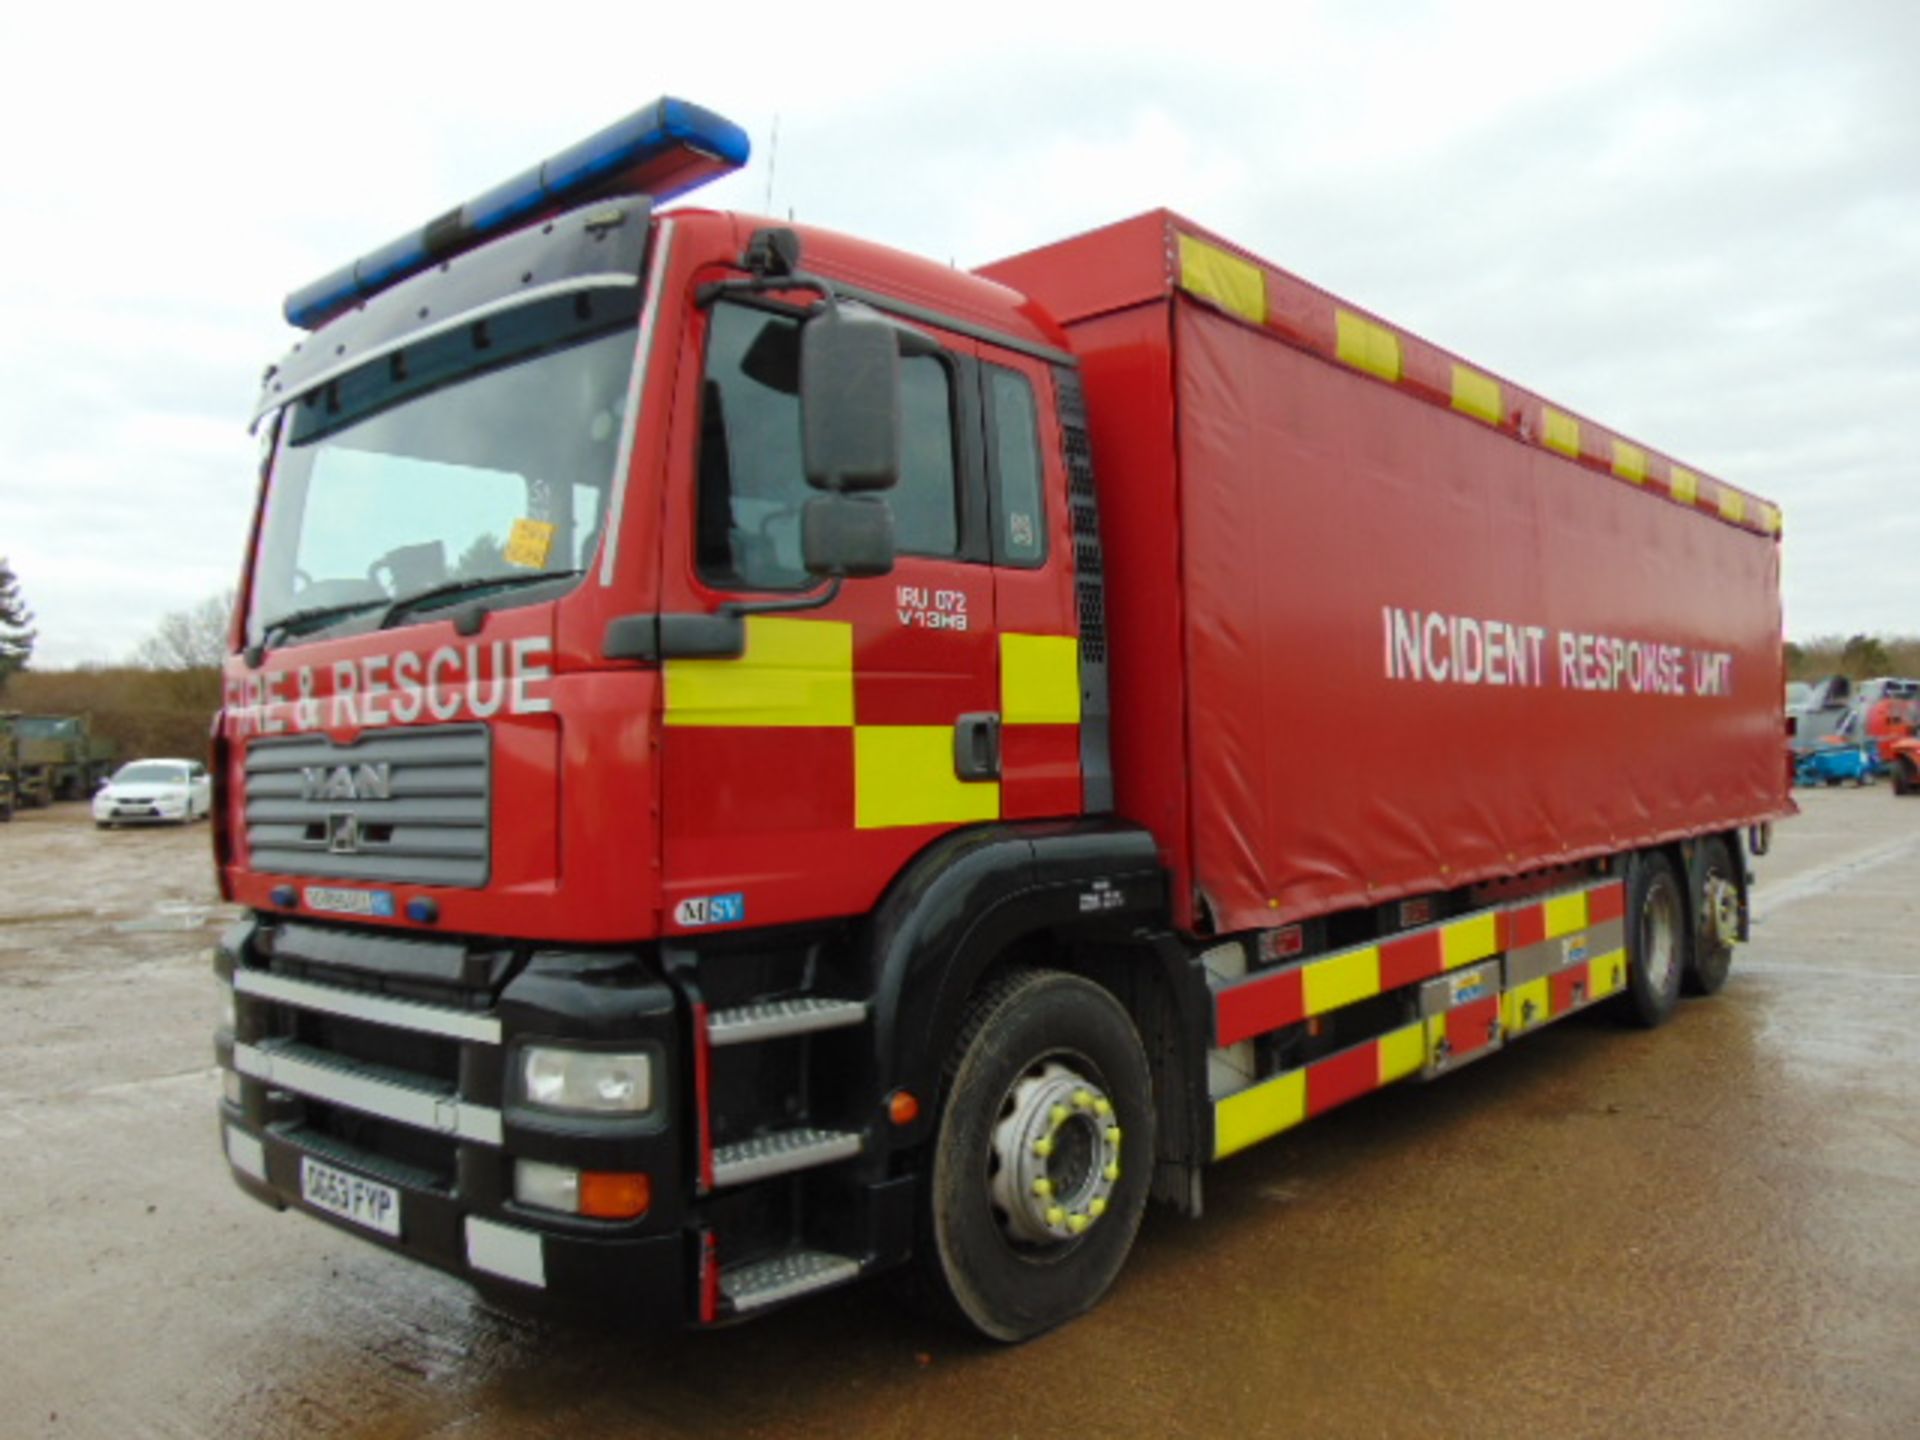 2004 MAN TG-A 6x2 Incident Support Unit - Image 3 of 26